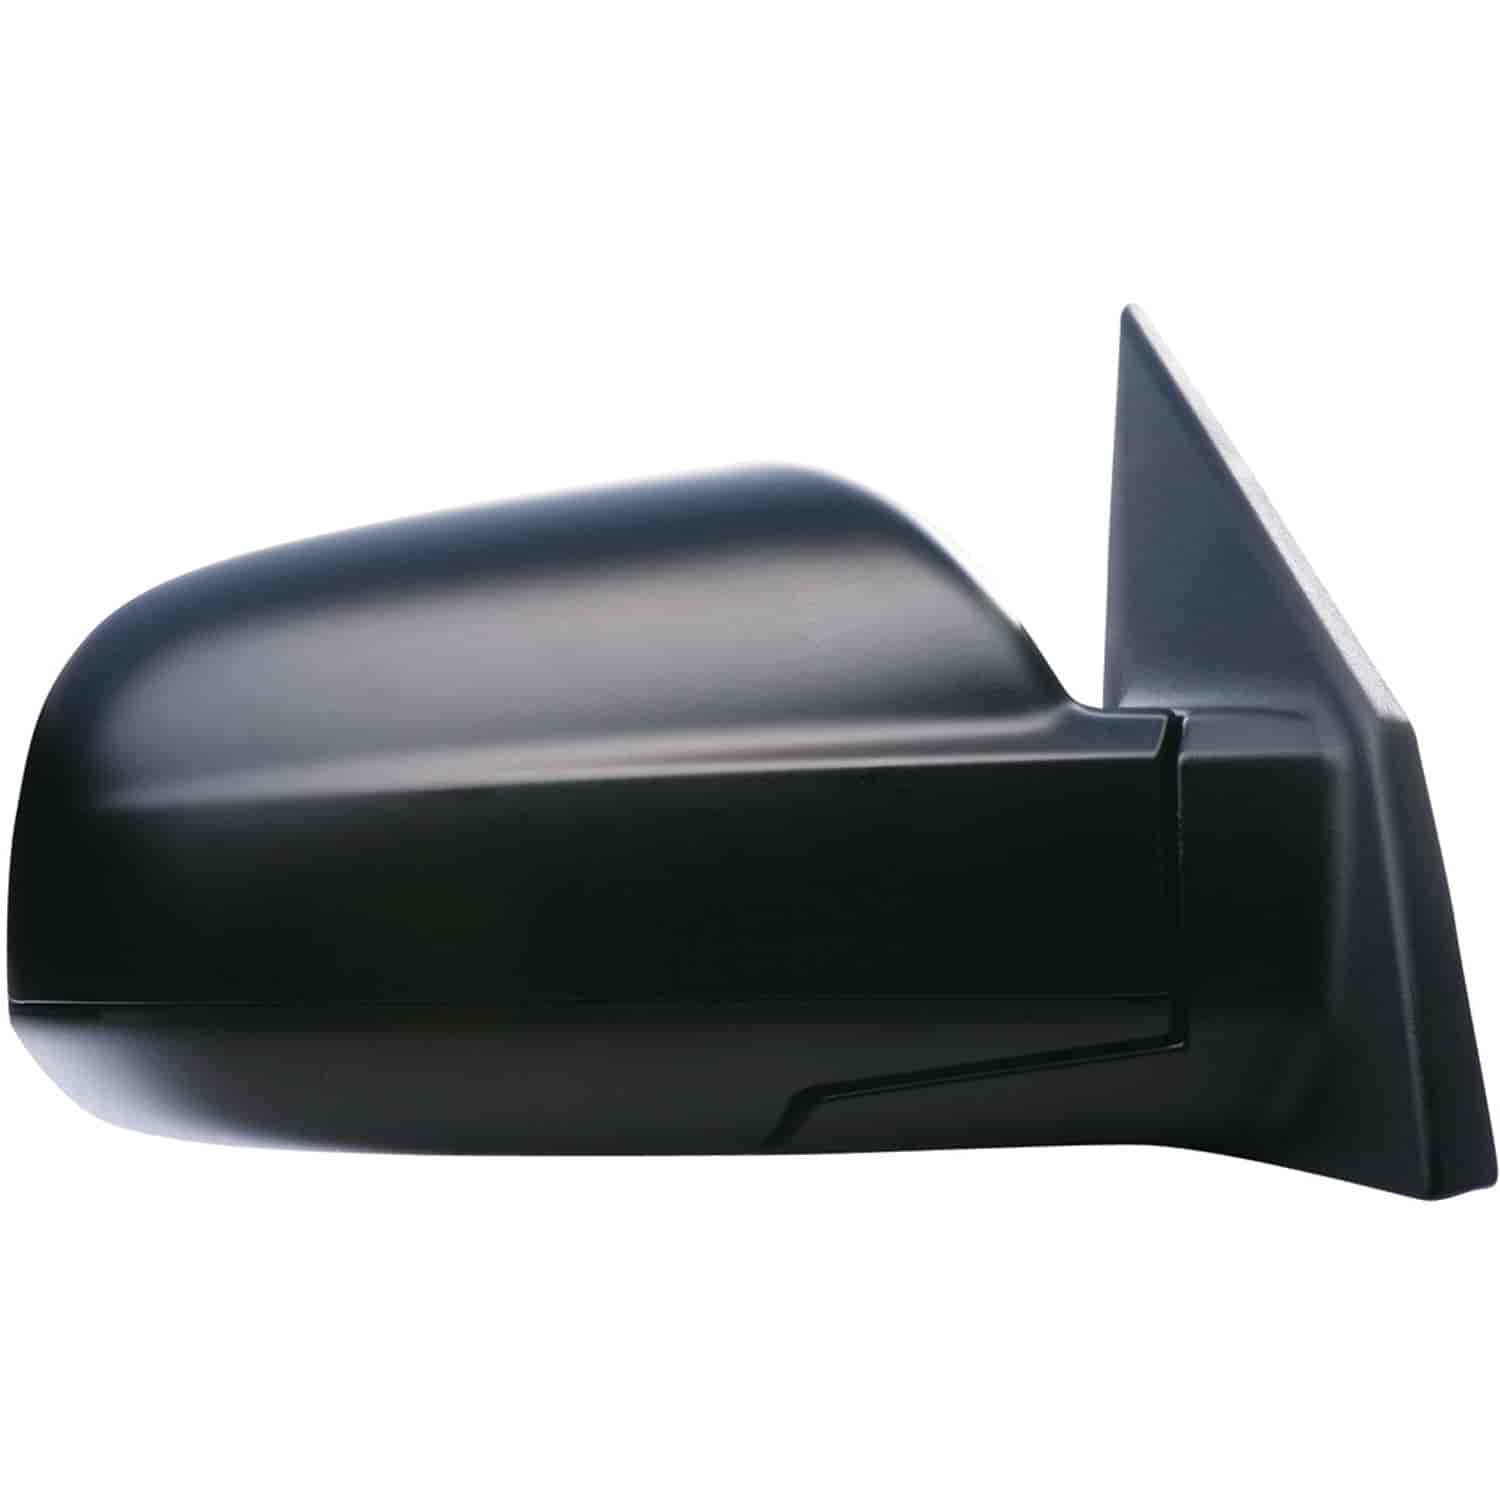 OEM Style Replacement mirror for 05-10 Hyundai Tucson passenger side mirror tested to fit and functi